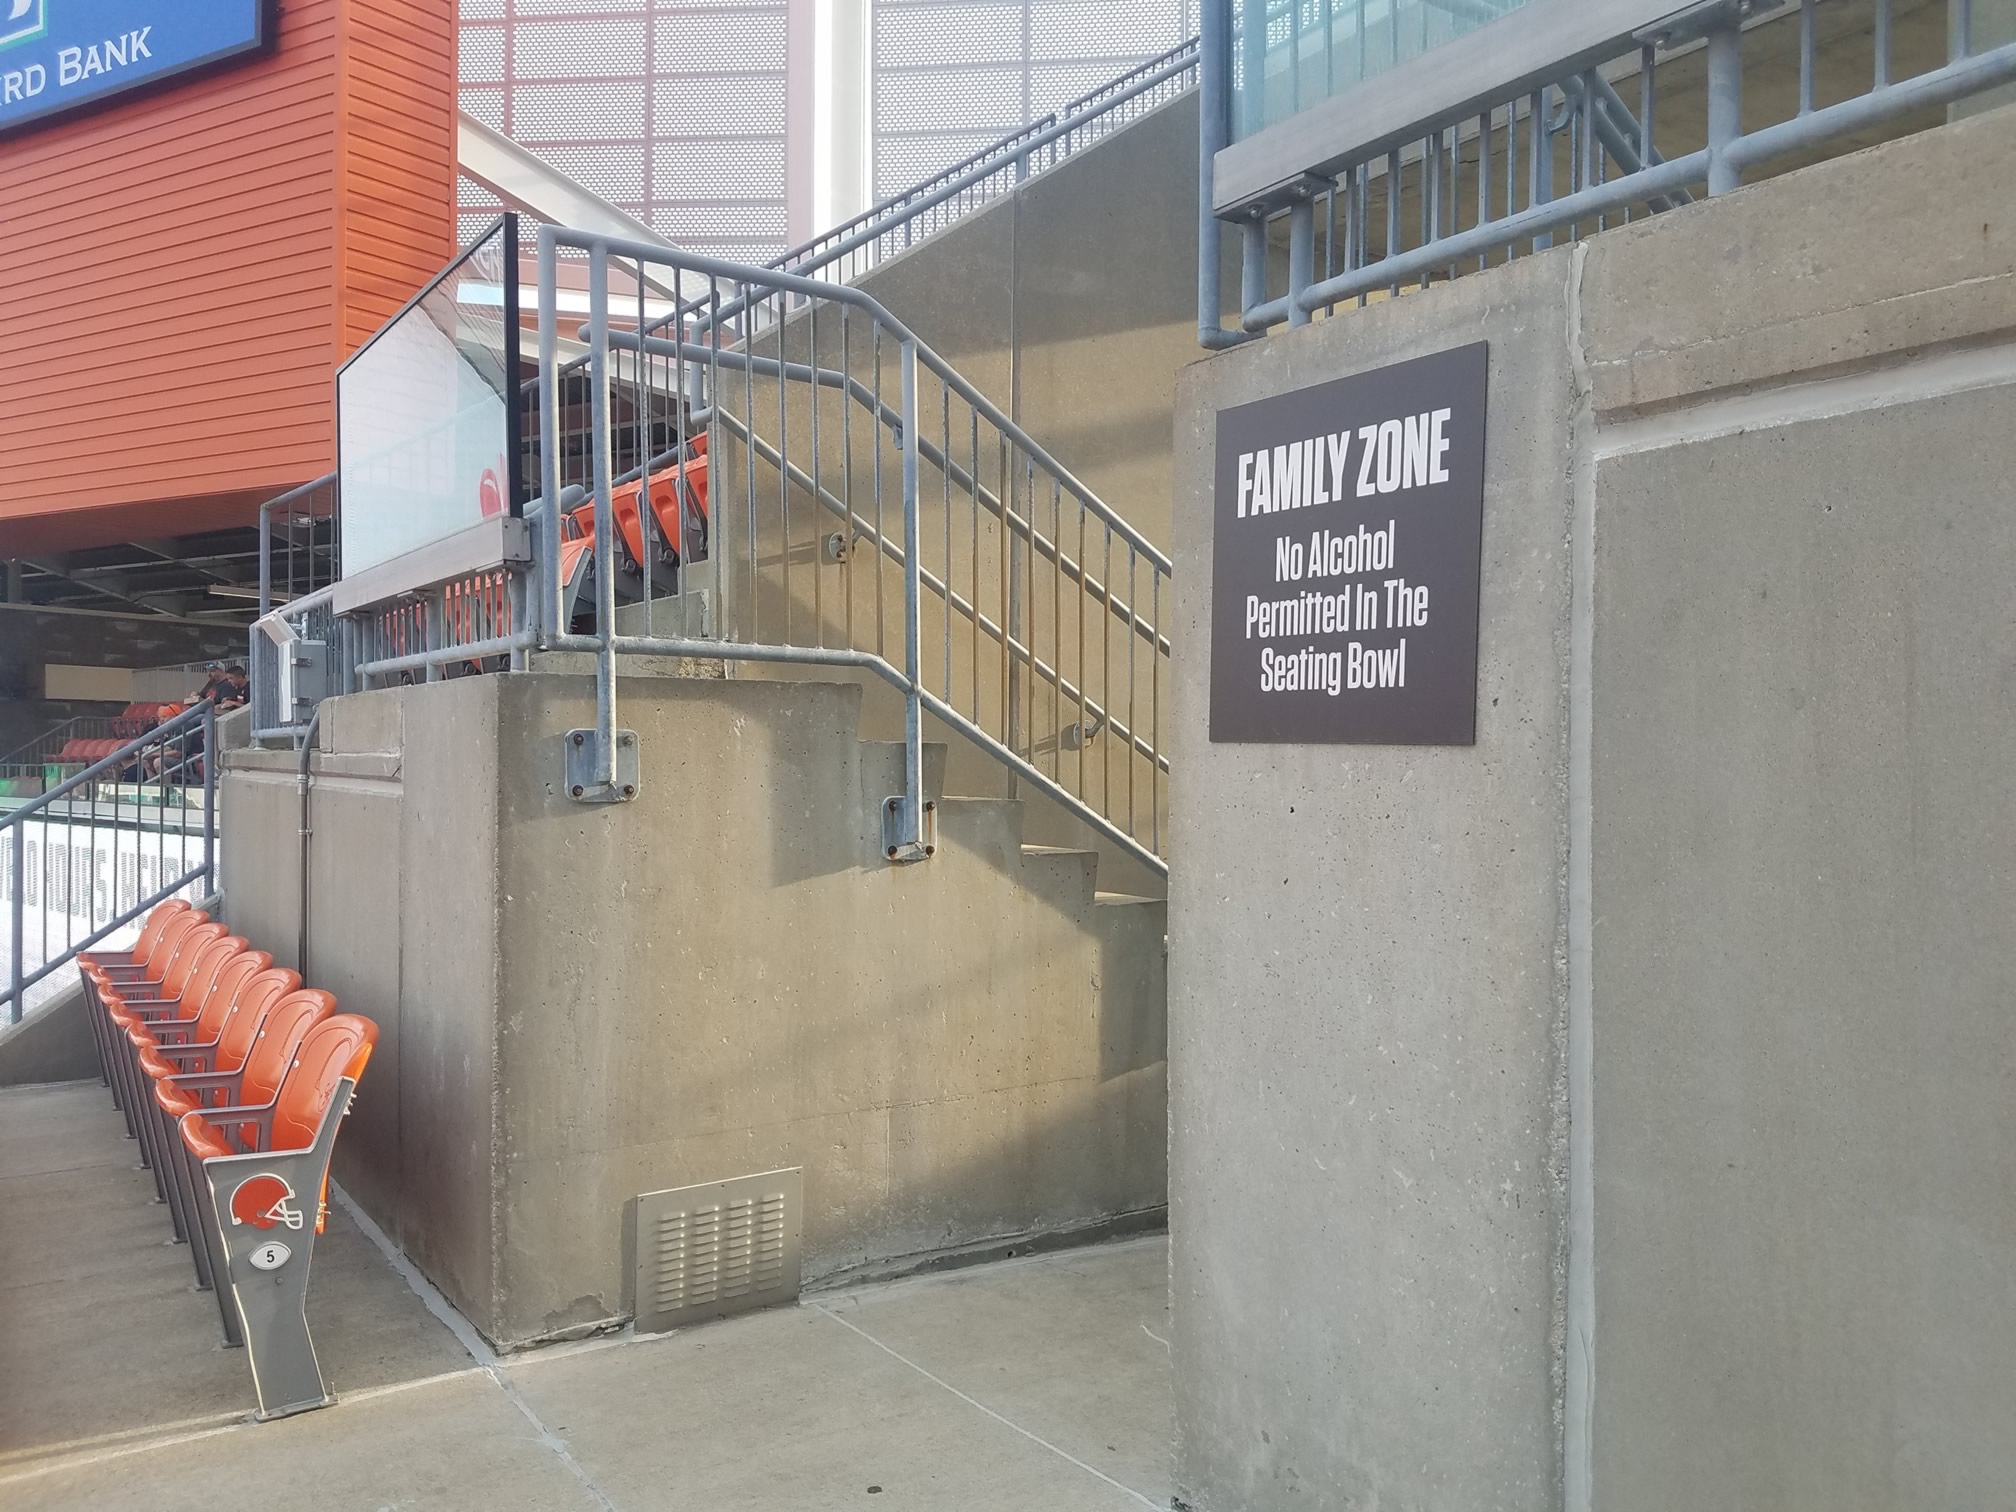 Section 351 at Cleveland Browns Stadium - RateYourSeats.com